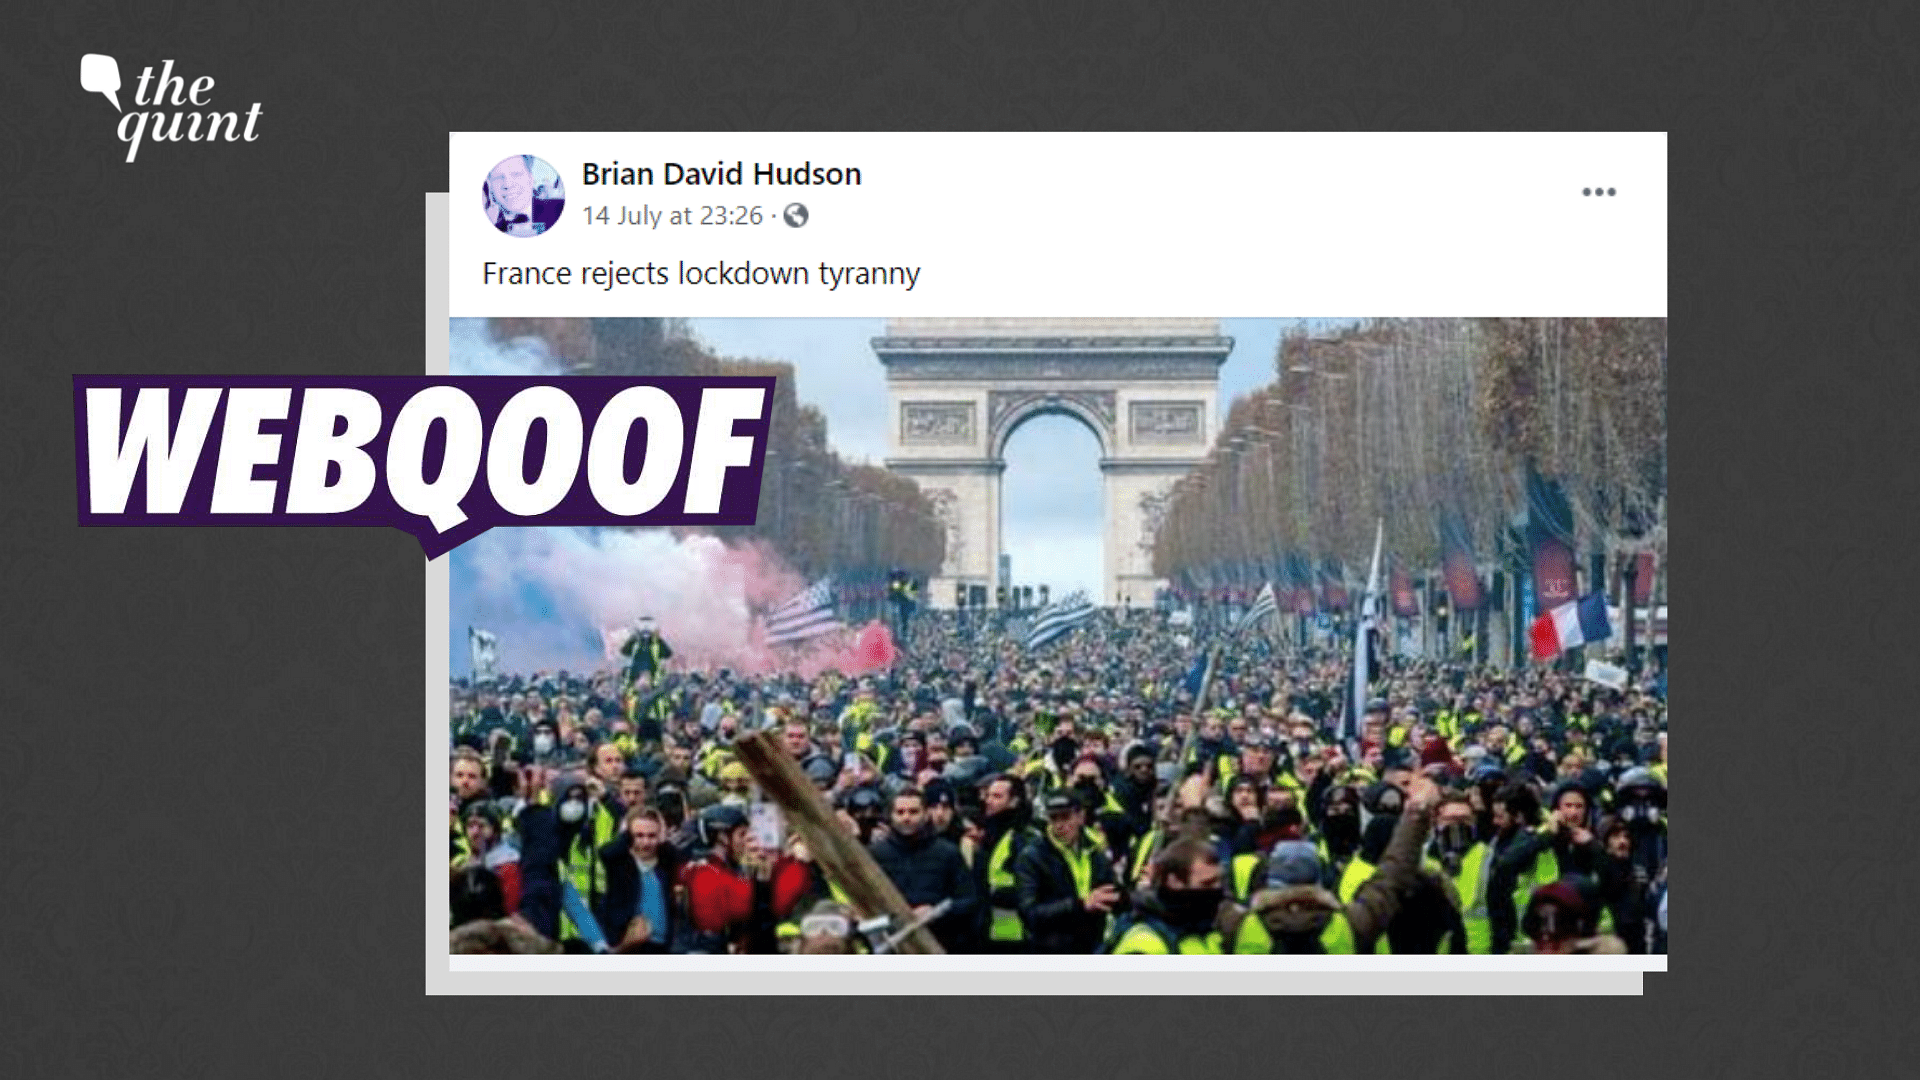 <div class="paragraphs"><p>Fact-Check | The photograph shows a 2018 protest in France about fuel tax hikes, not a COVID-19 related protest.&nbsp;</p></div>